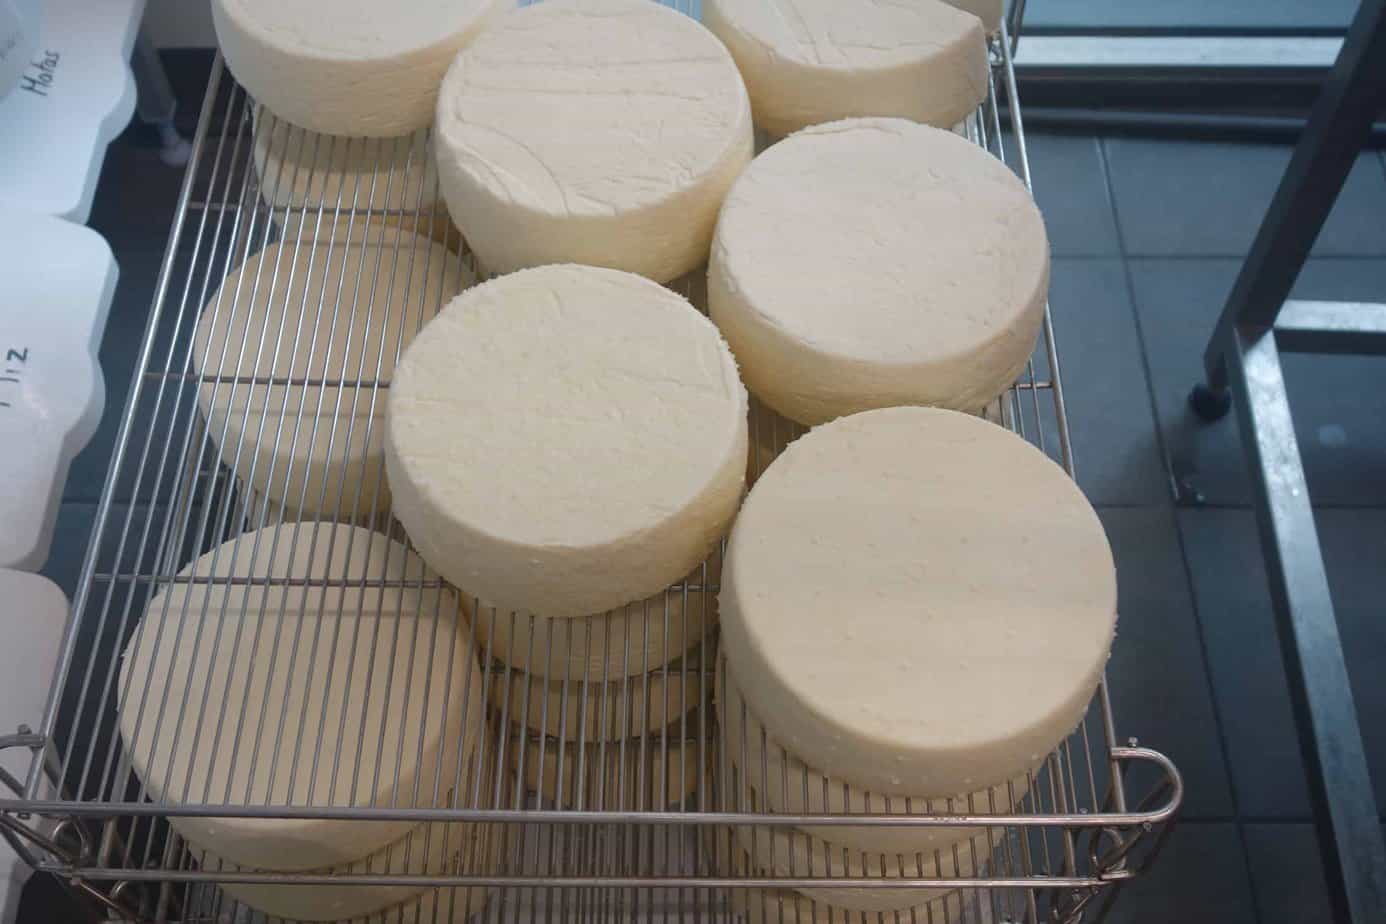 The tomme, a mountain-style cheese